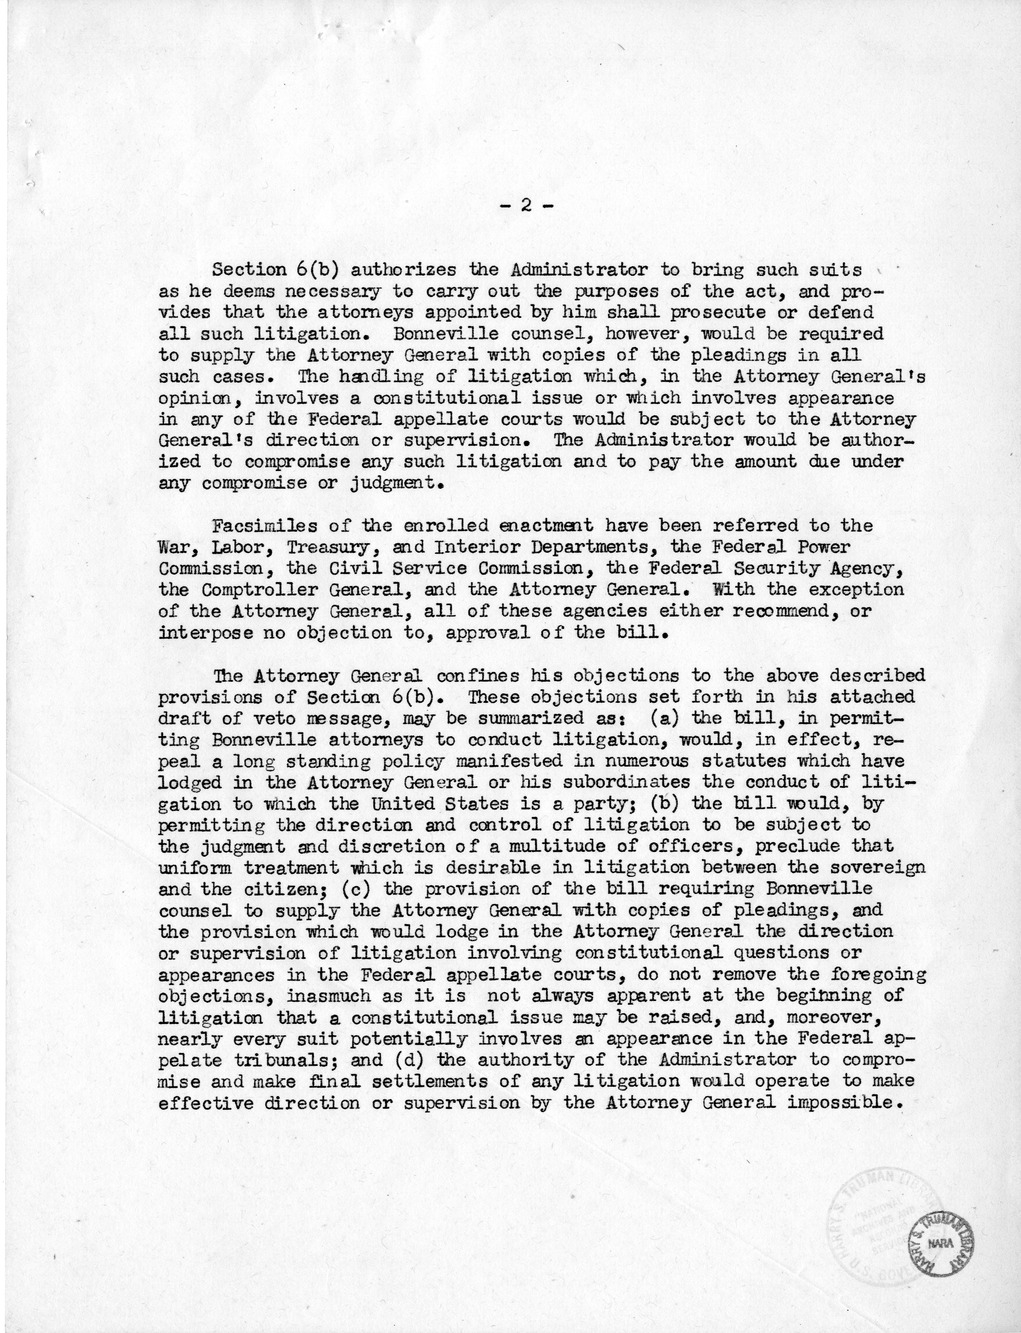 Memorandum from Paul H. Appleby to M. C. Latta, H.R. 2690, To Amend the Bonneville Project Act, with Attachments